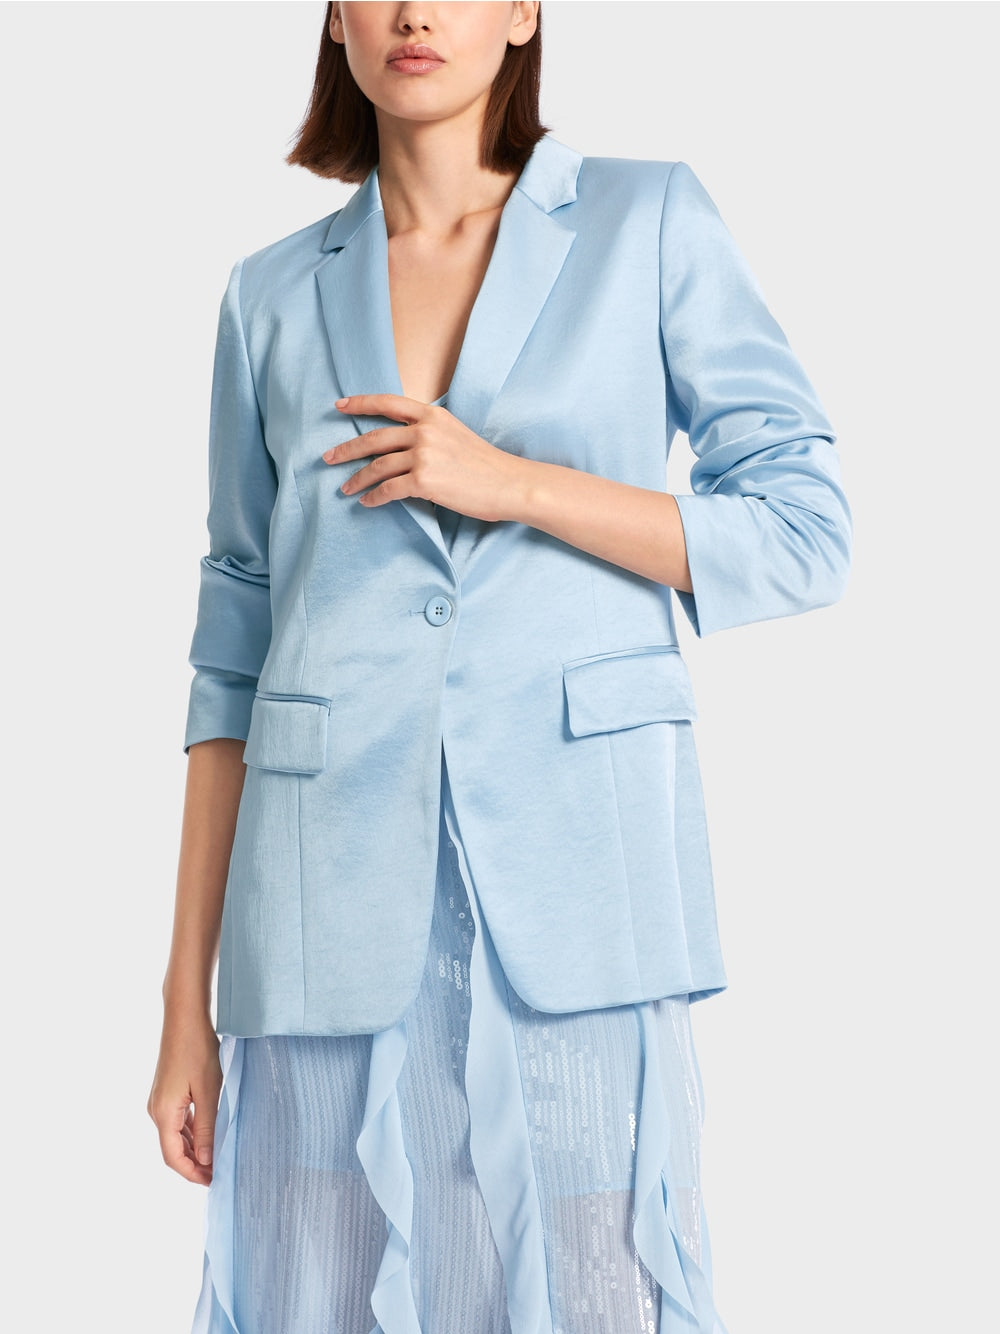 Marc Cain Collections Blazer with an elegant sheen WC34.20W46 Summer Sky